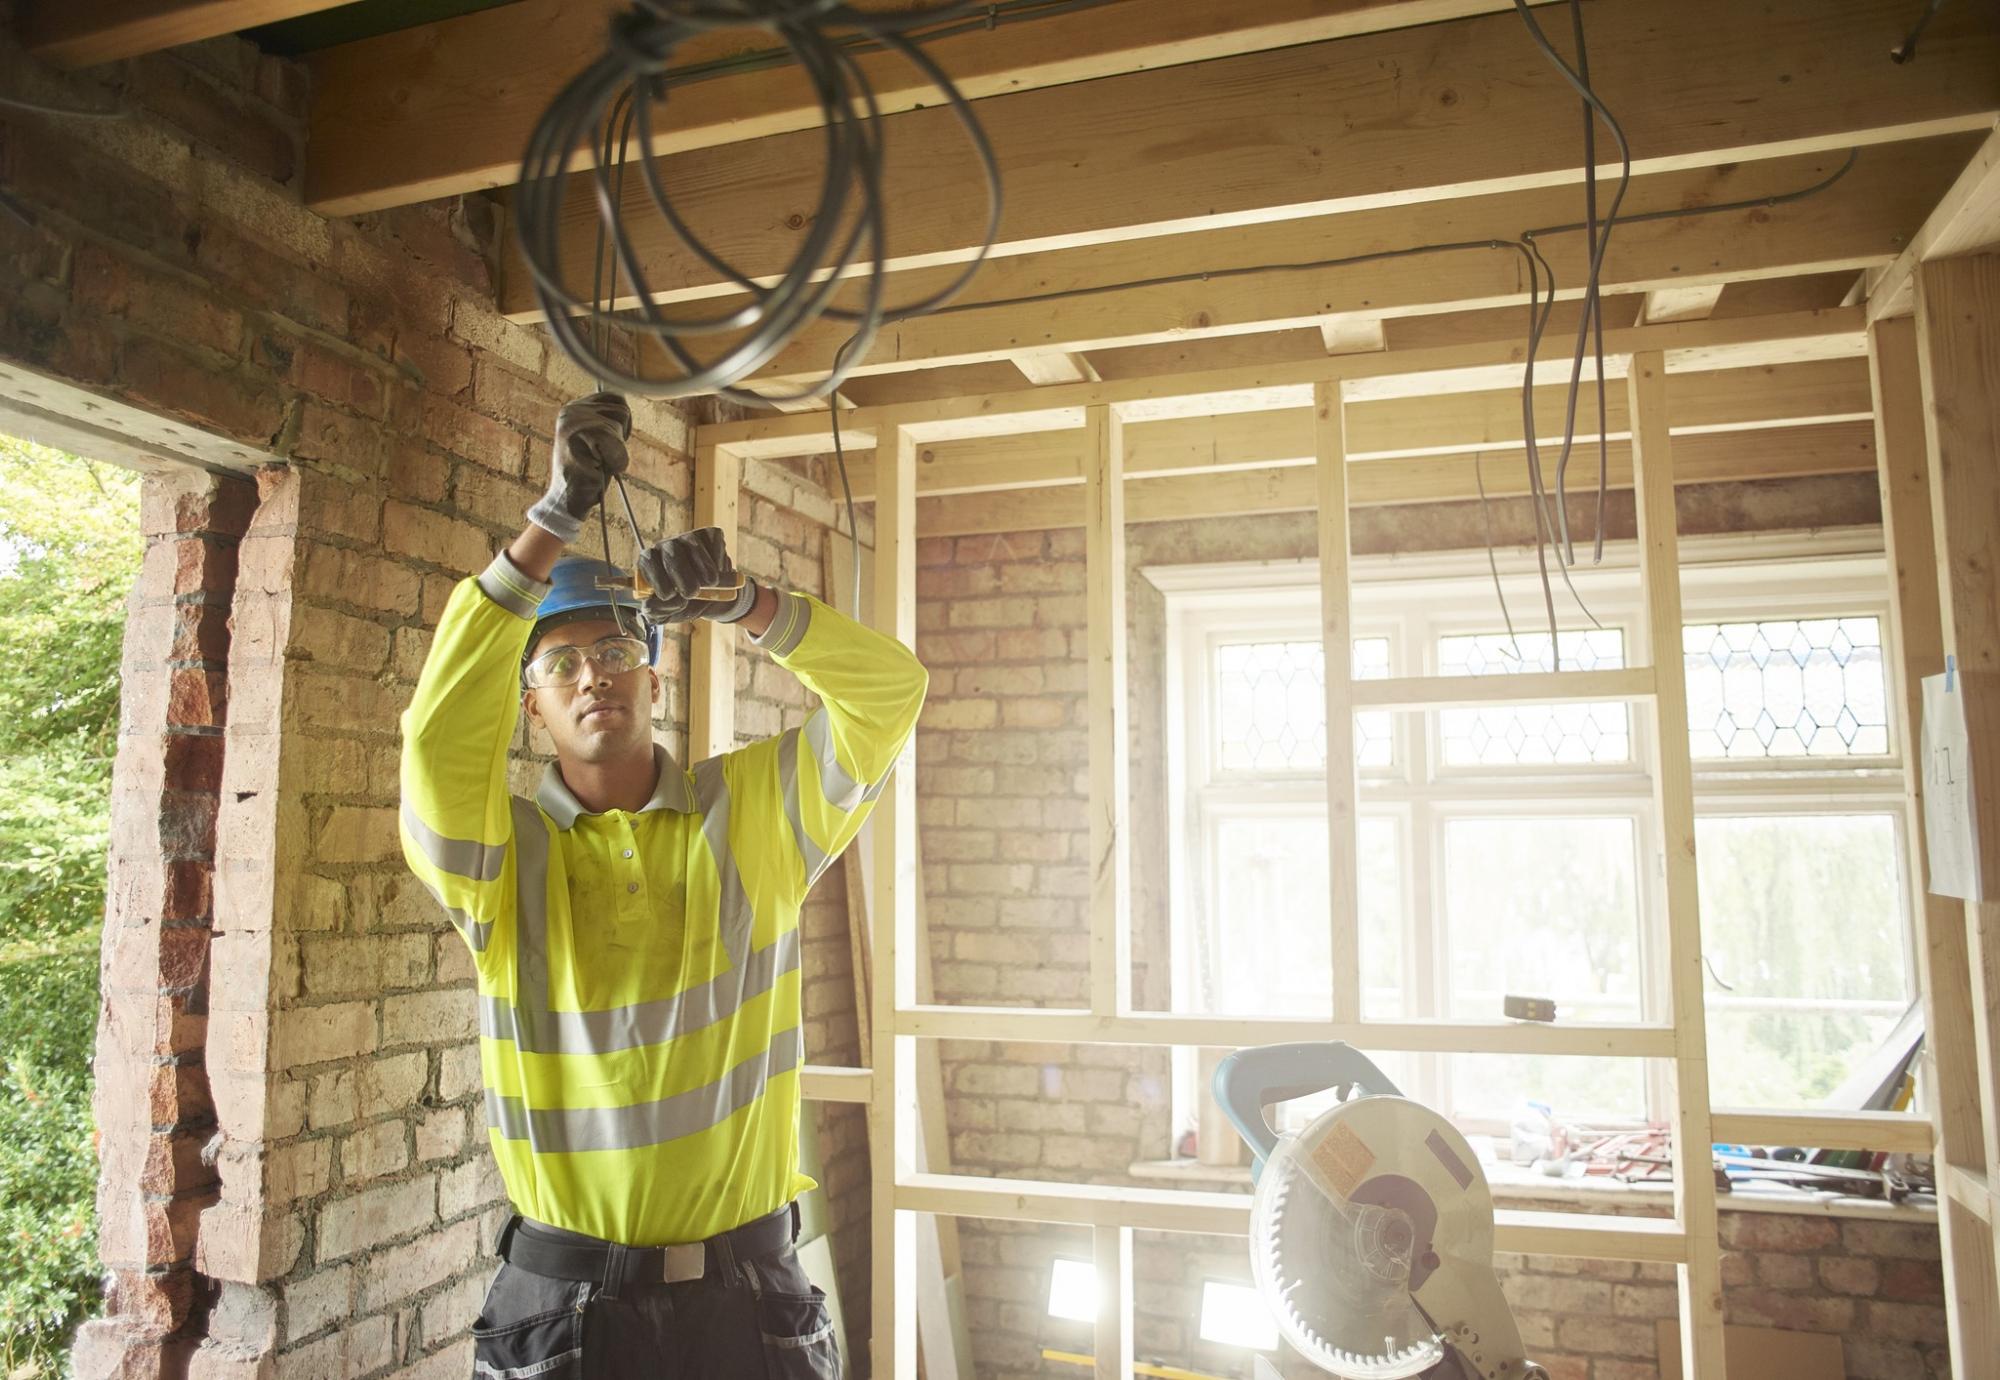 Electrician wiring up a newly built house